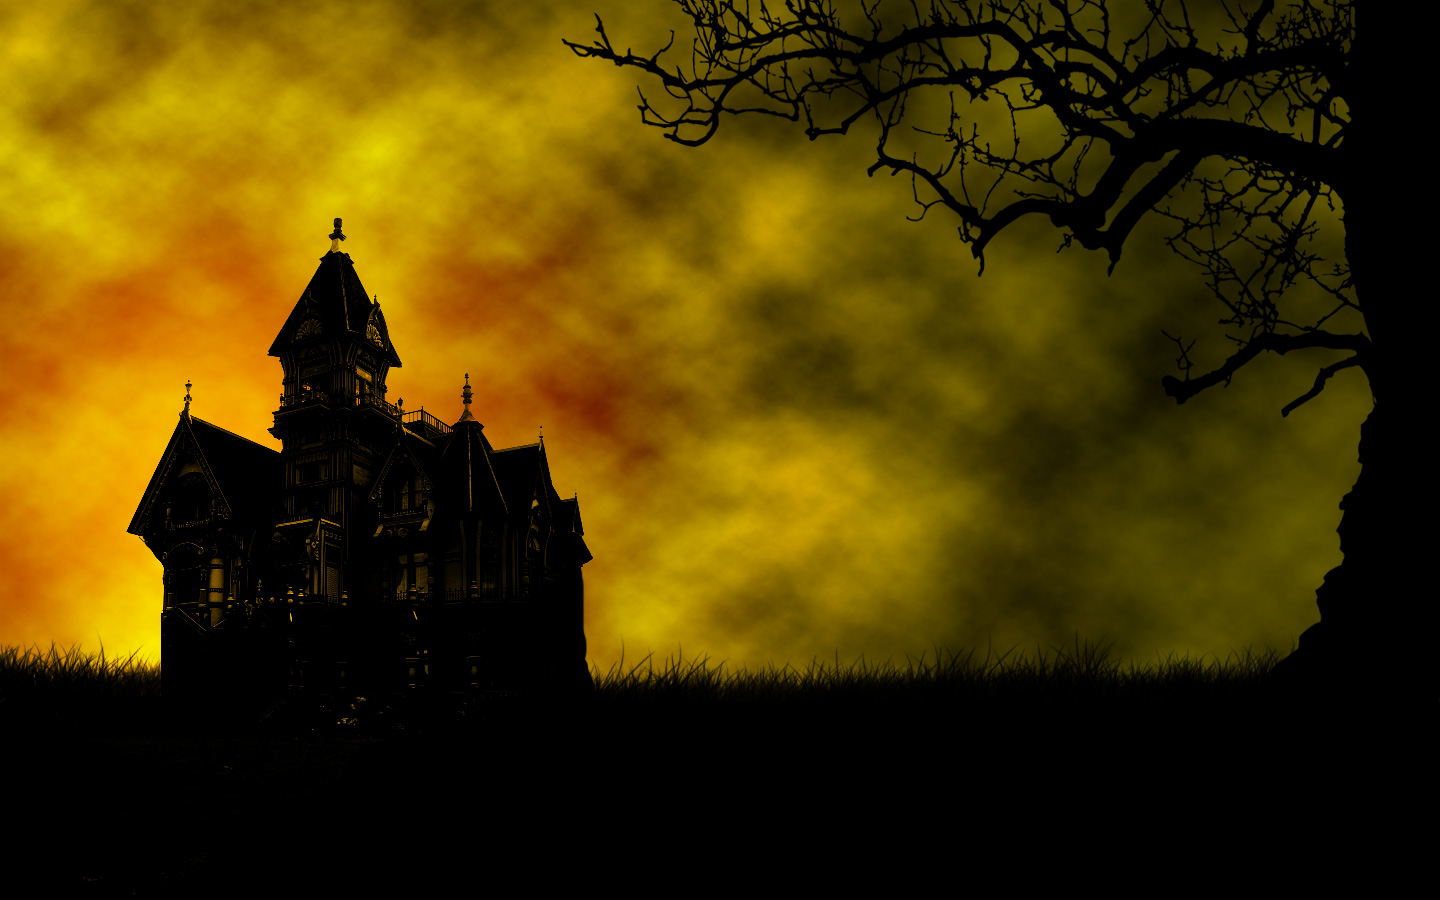  Wazoo   Clothing and other Woundrous Things Halloween Haunted Houses 1440x900